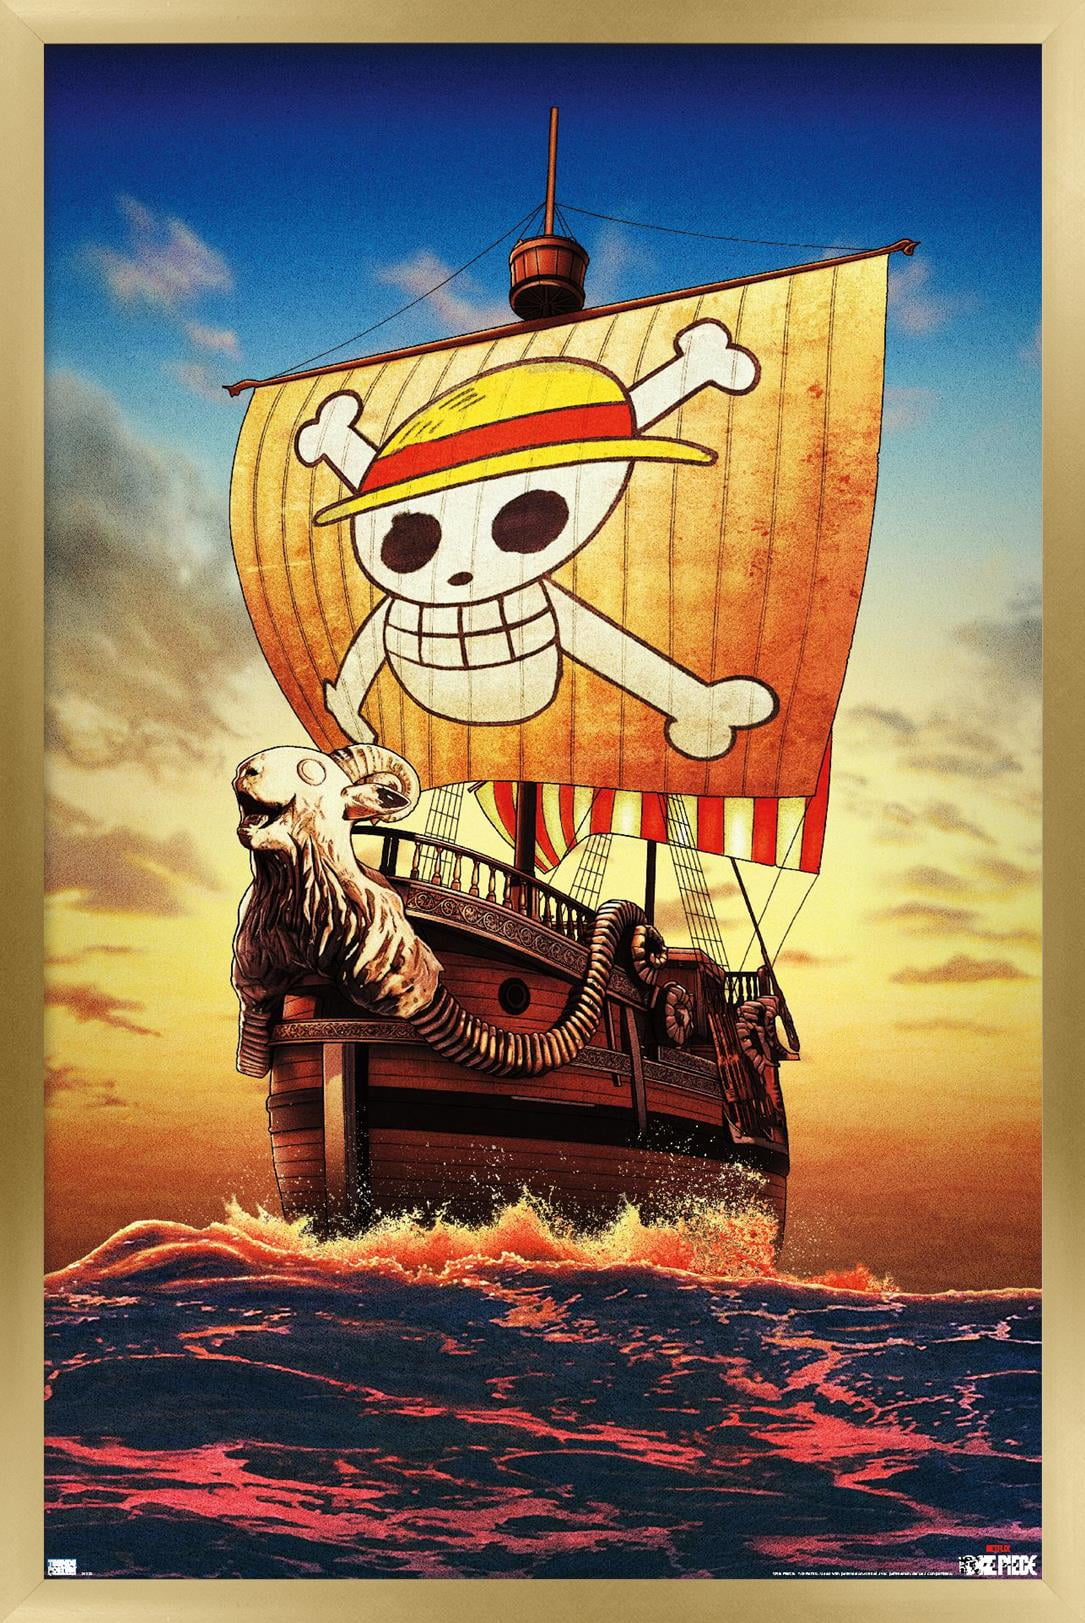 Going Merry ♥ - ONE PIECE Fanpage